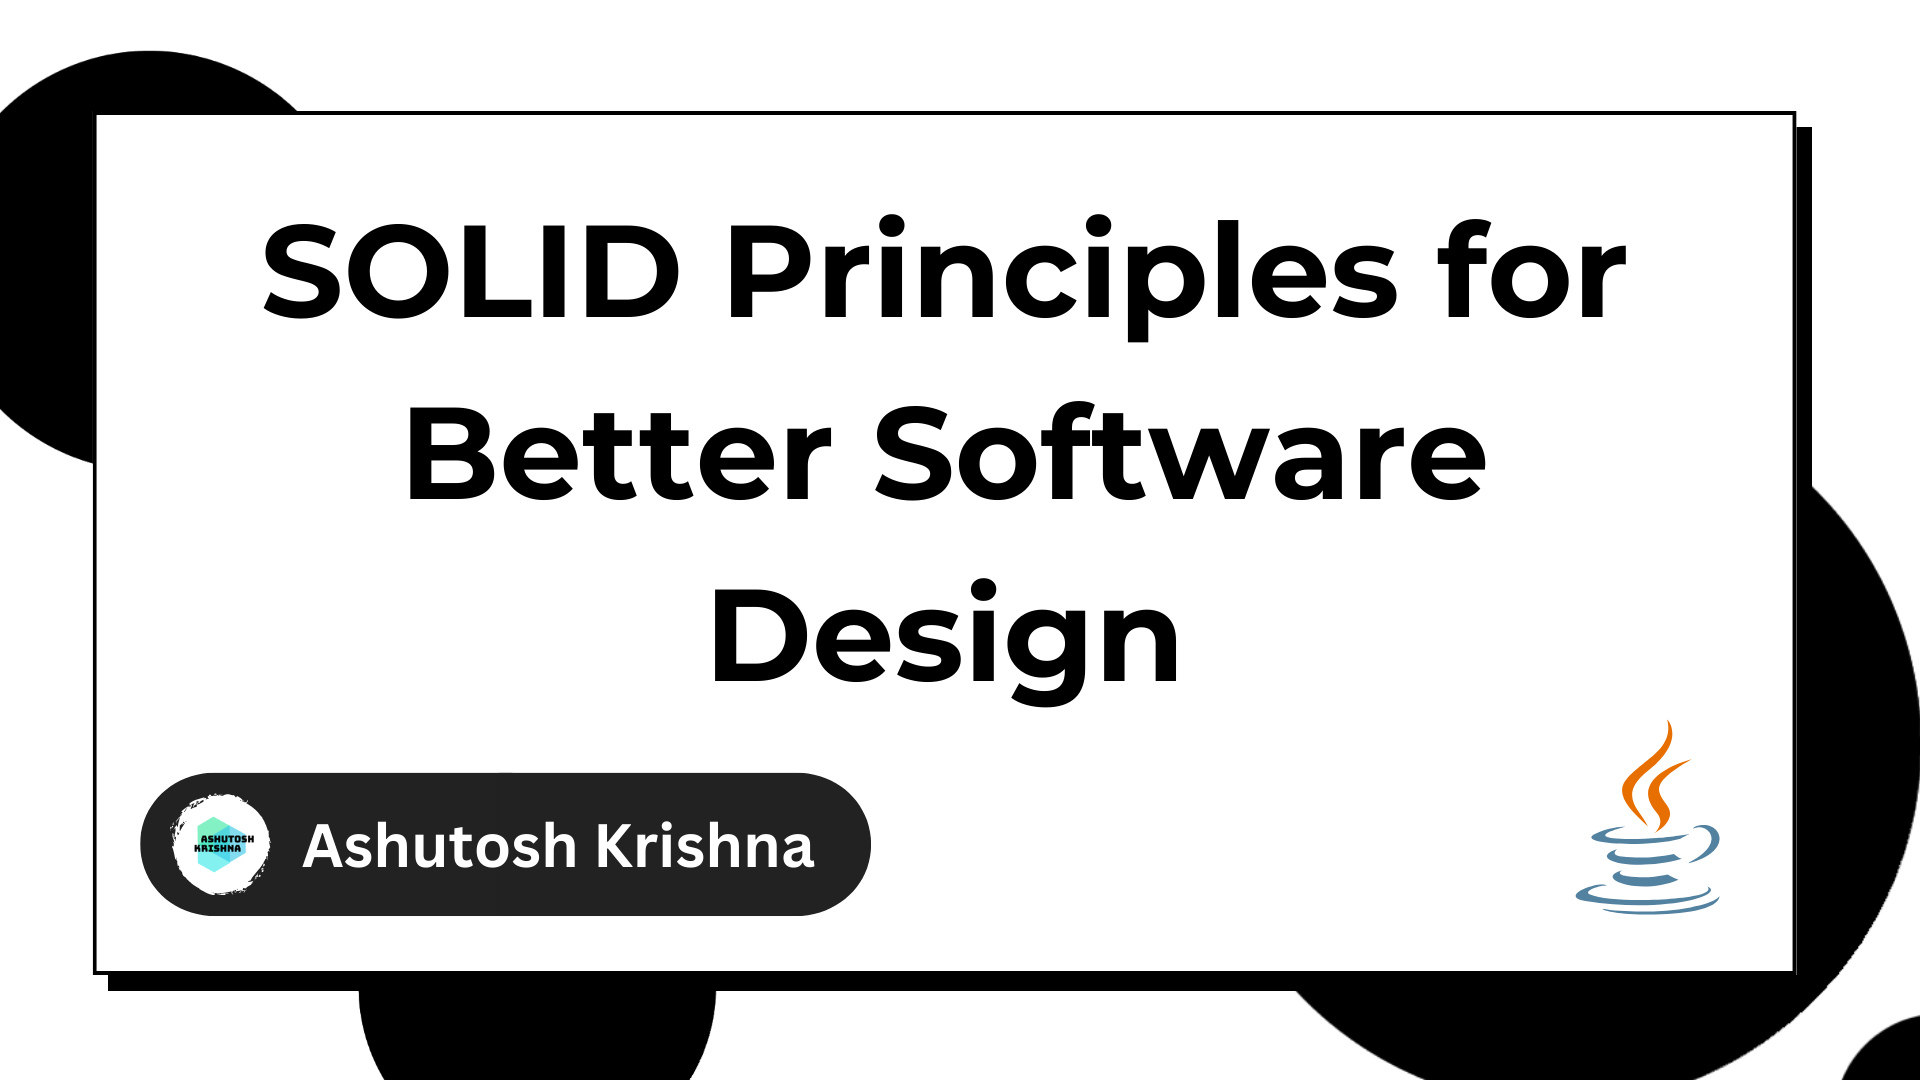 What is SOLID? Principles for Better Software Design